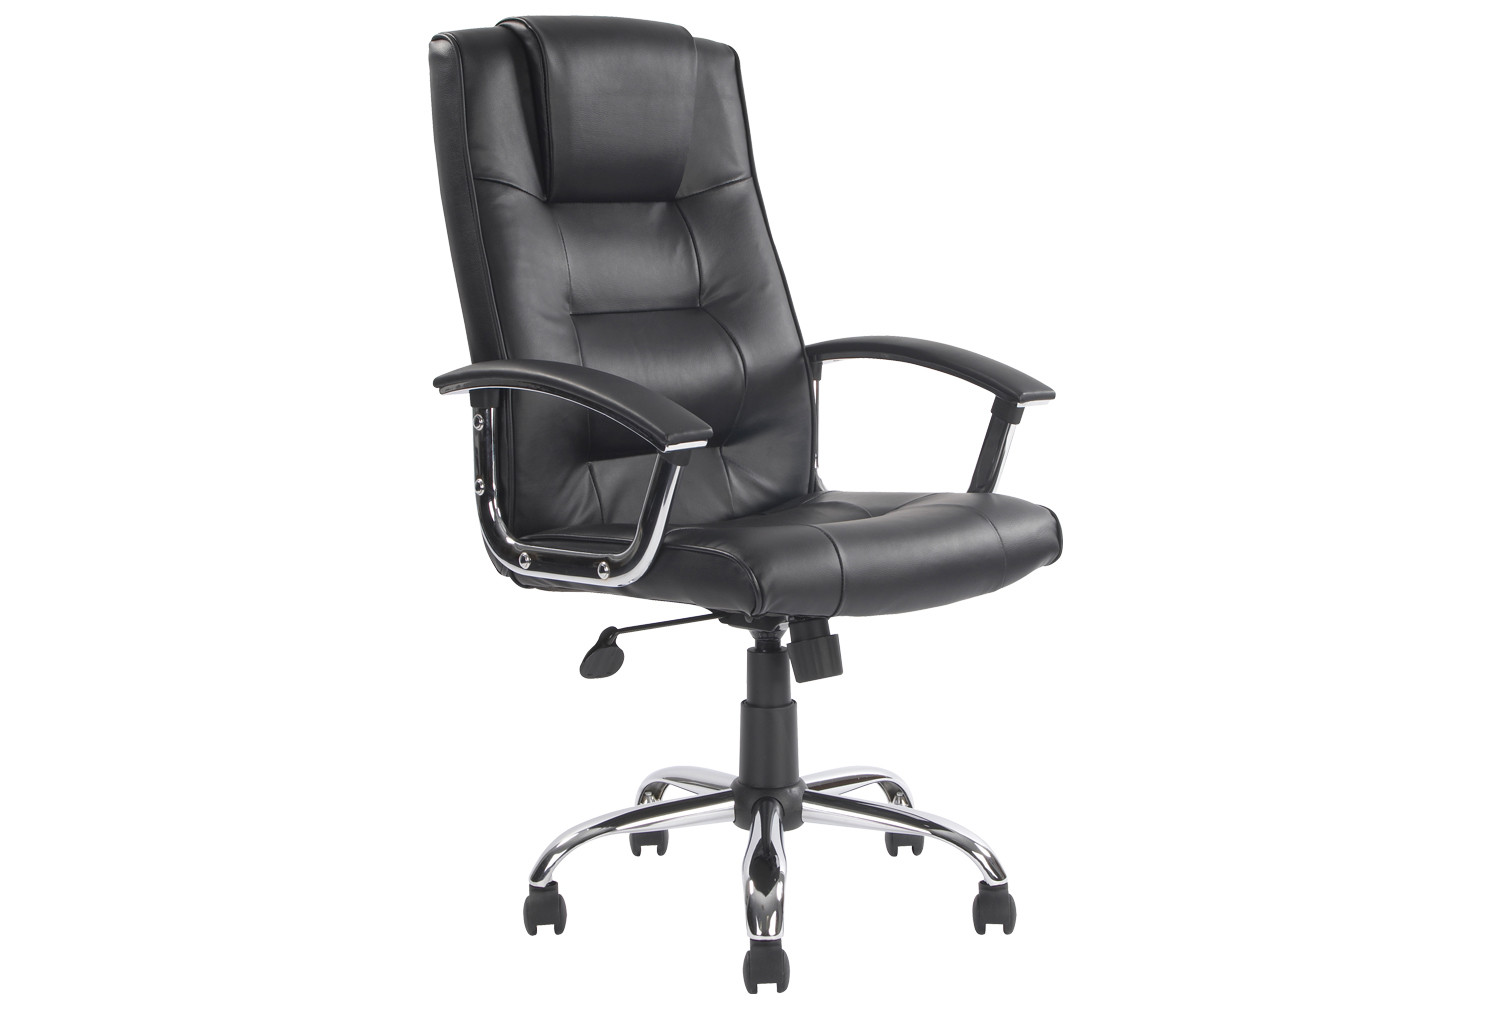 Skye High Back Black Leather Faced Executive Office Chair, Black, Express Delivery